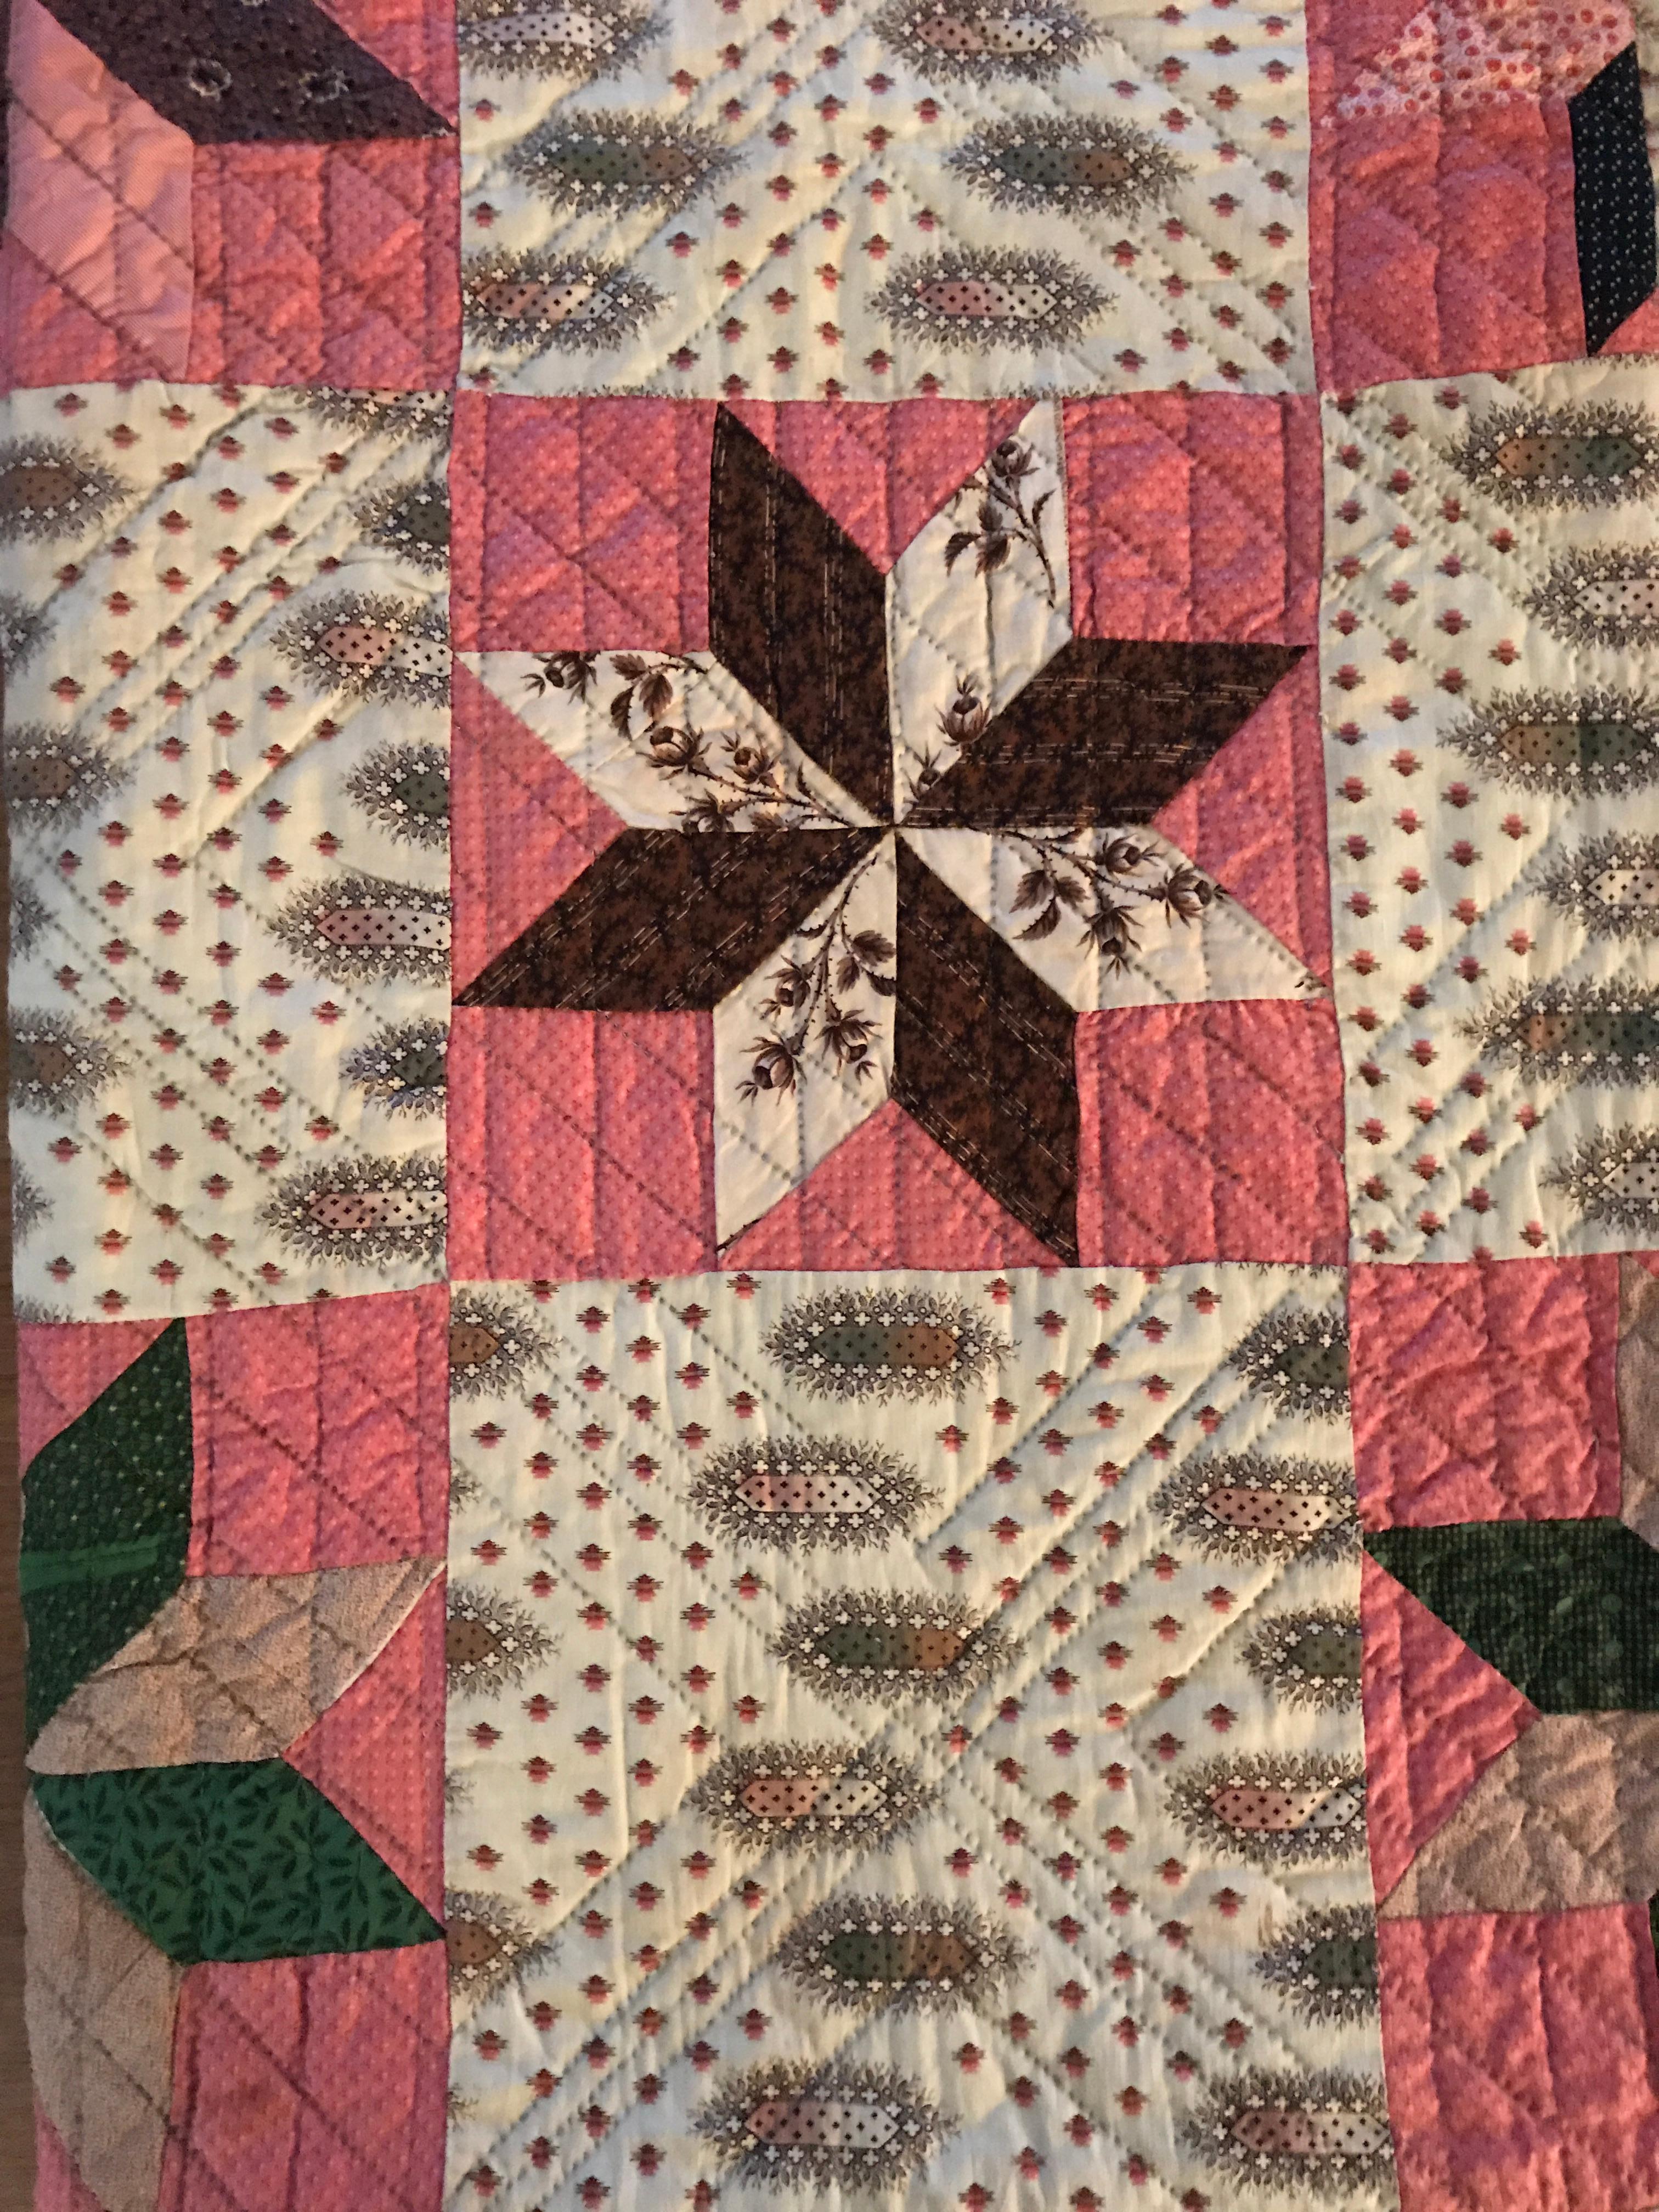 Quilted Antique Multicolored Patchwork Quilt